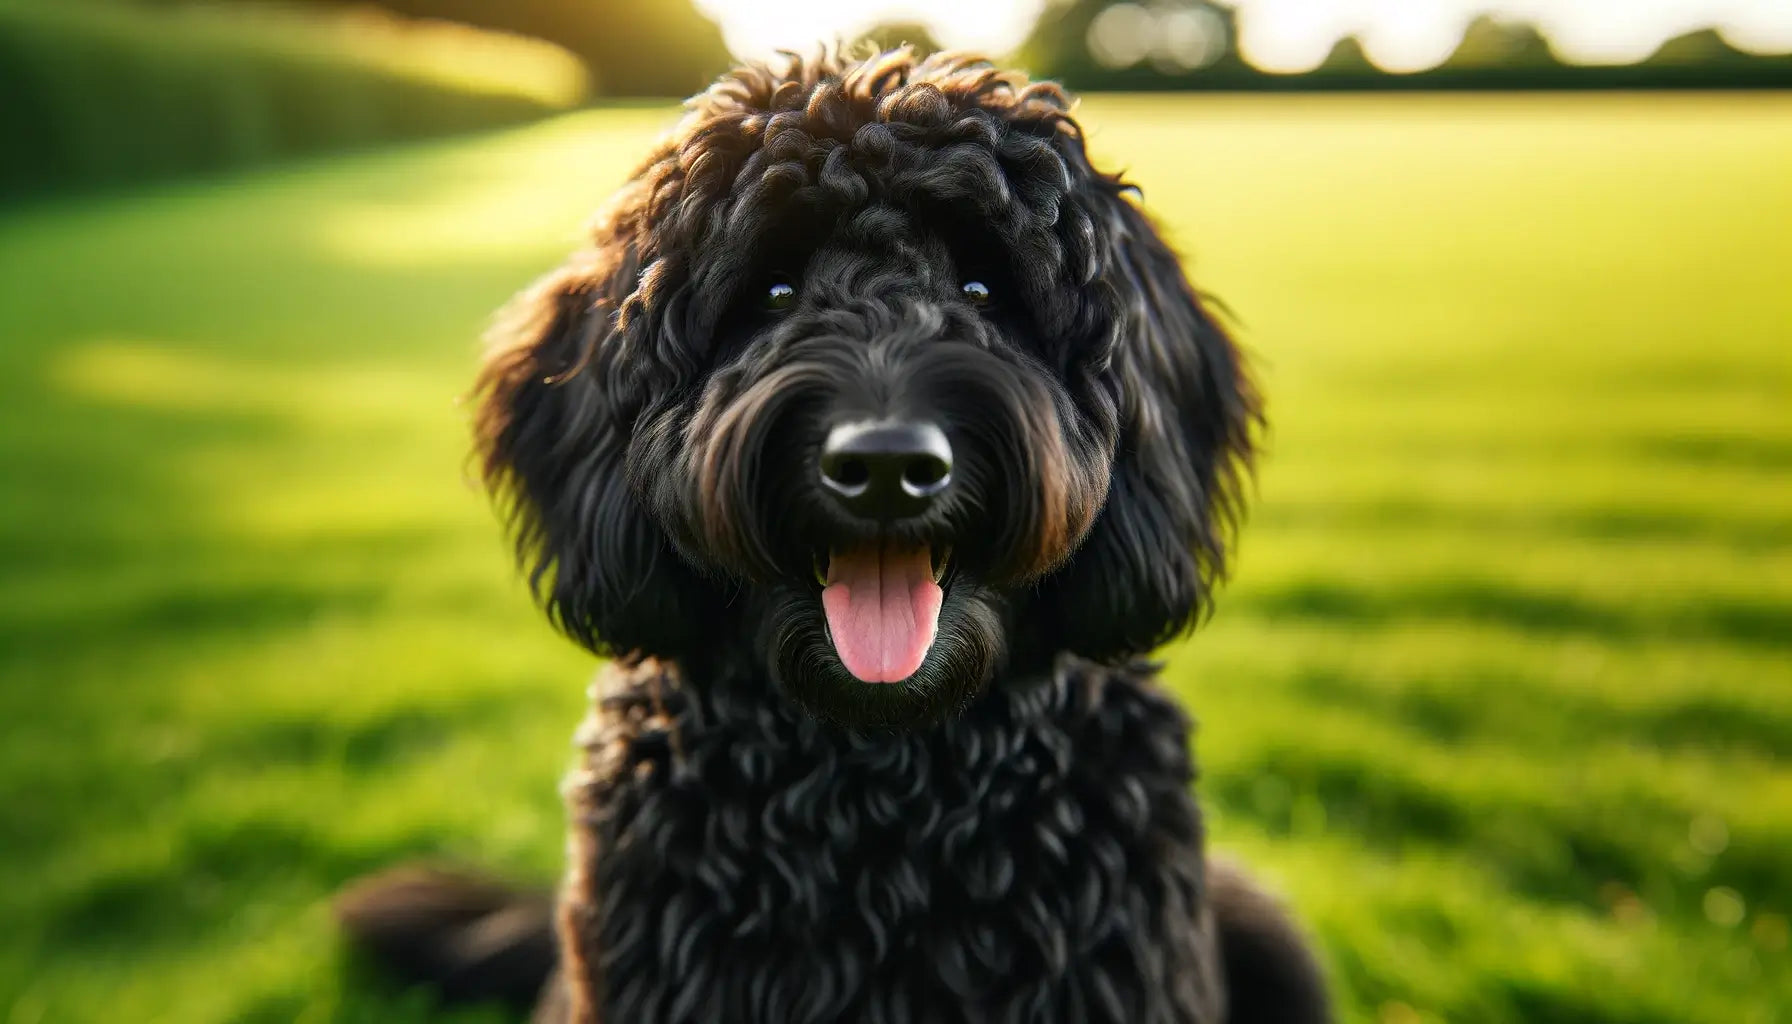 Black Goldendoodle sitting on a grass field, looking directly at the camera with a joyful expression and its tongue slightly out.